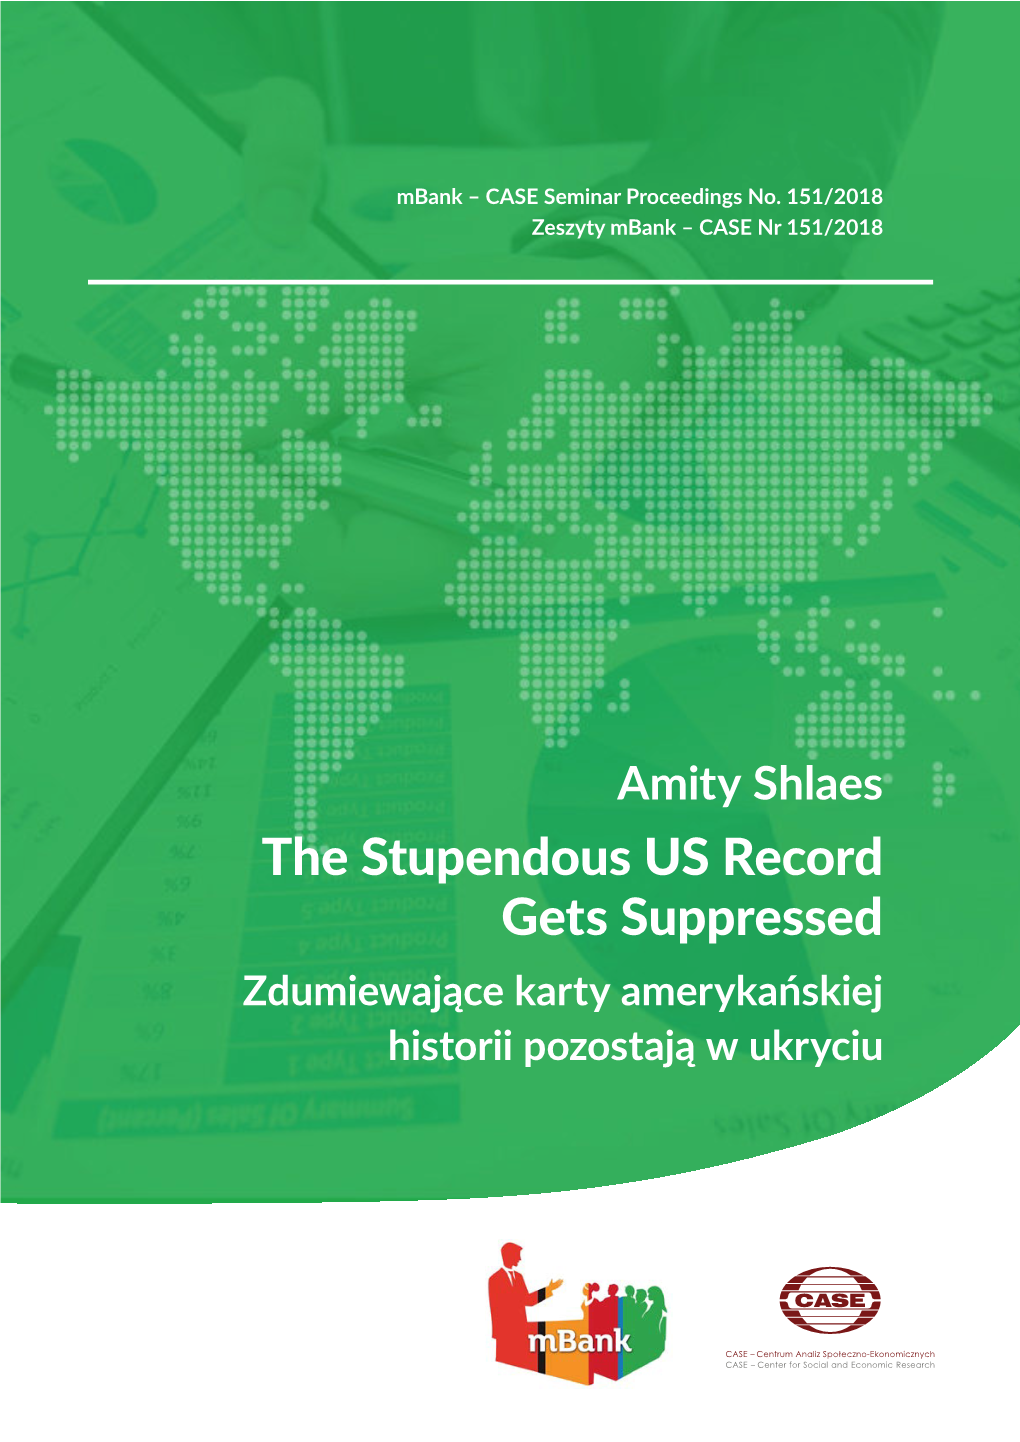 The Stupendous US Record Gets Suppressed